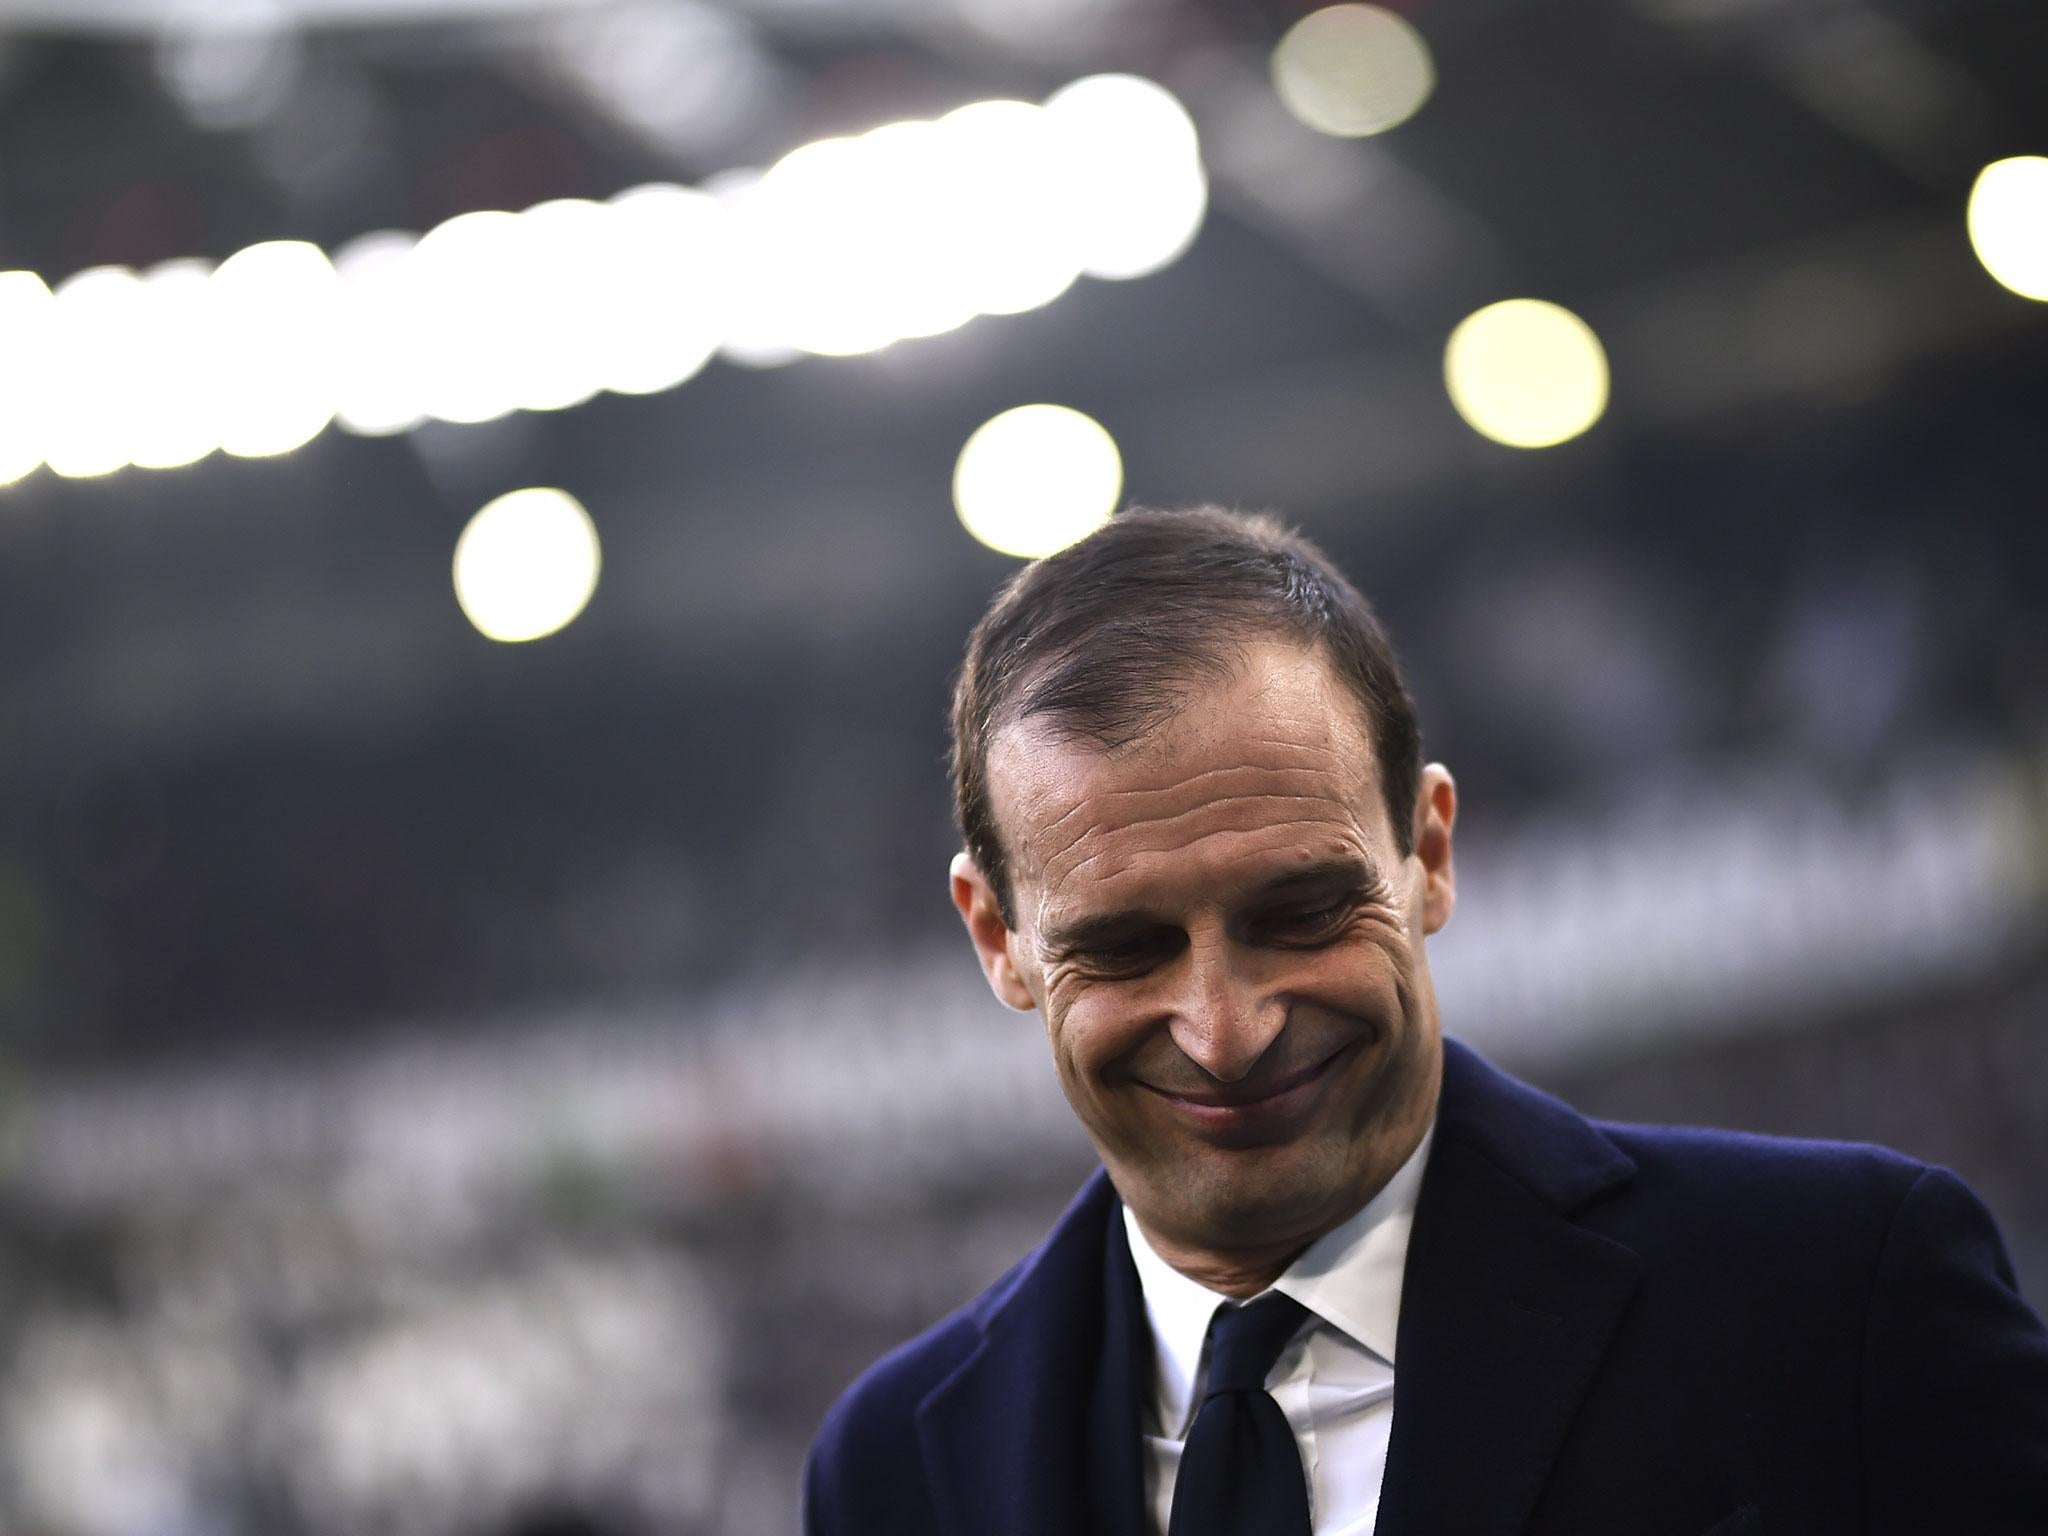 There is a sense, however, that Massimiliano Allegri’s profile isn’t yet as high as his talent merits